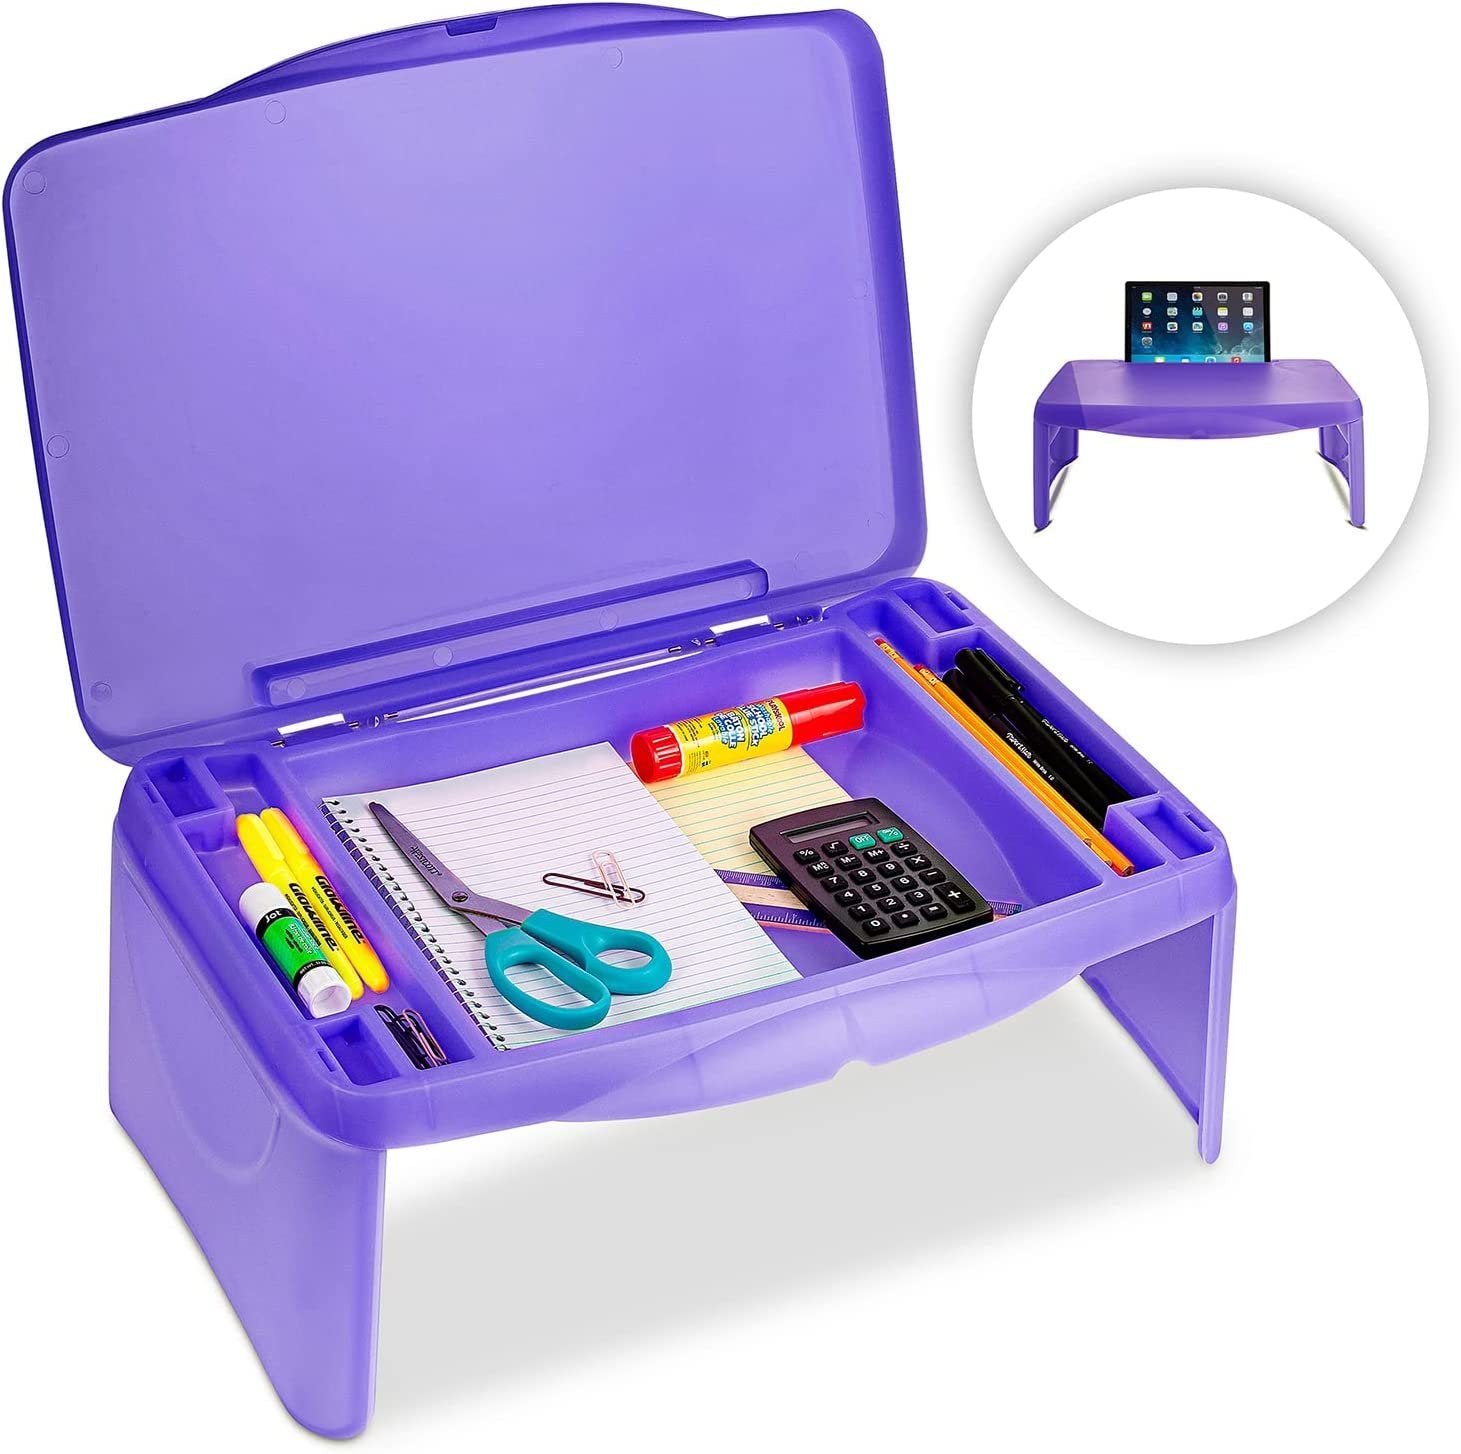 Folding Lap Desk, Laptop Desk, Breakfast Table, Bed Table, Serving Tray - The lapdesk Contains Extra Storage Space and dividers & Folds Very Easy, Great for Kids, Adults, Boys, Girls, (Purple)